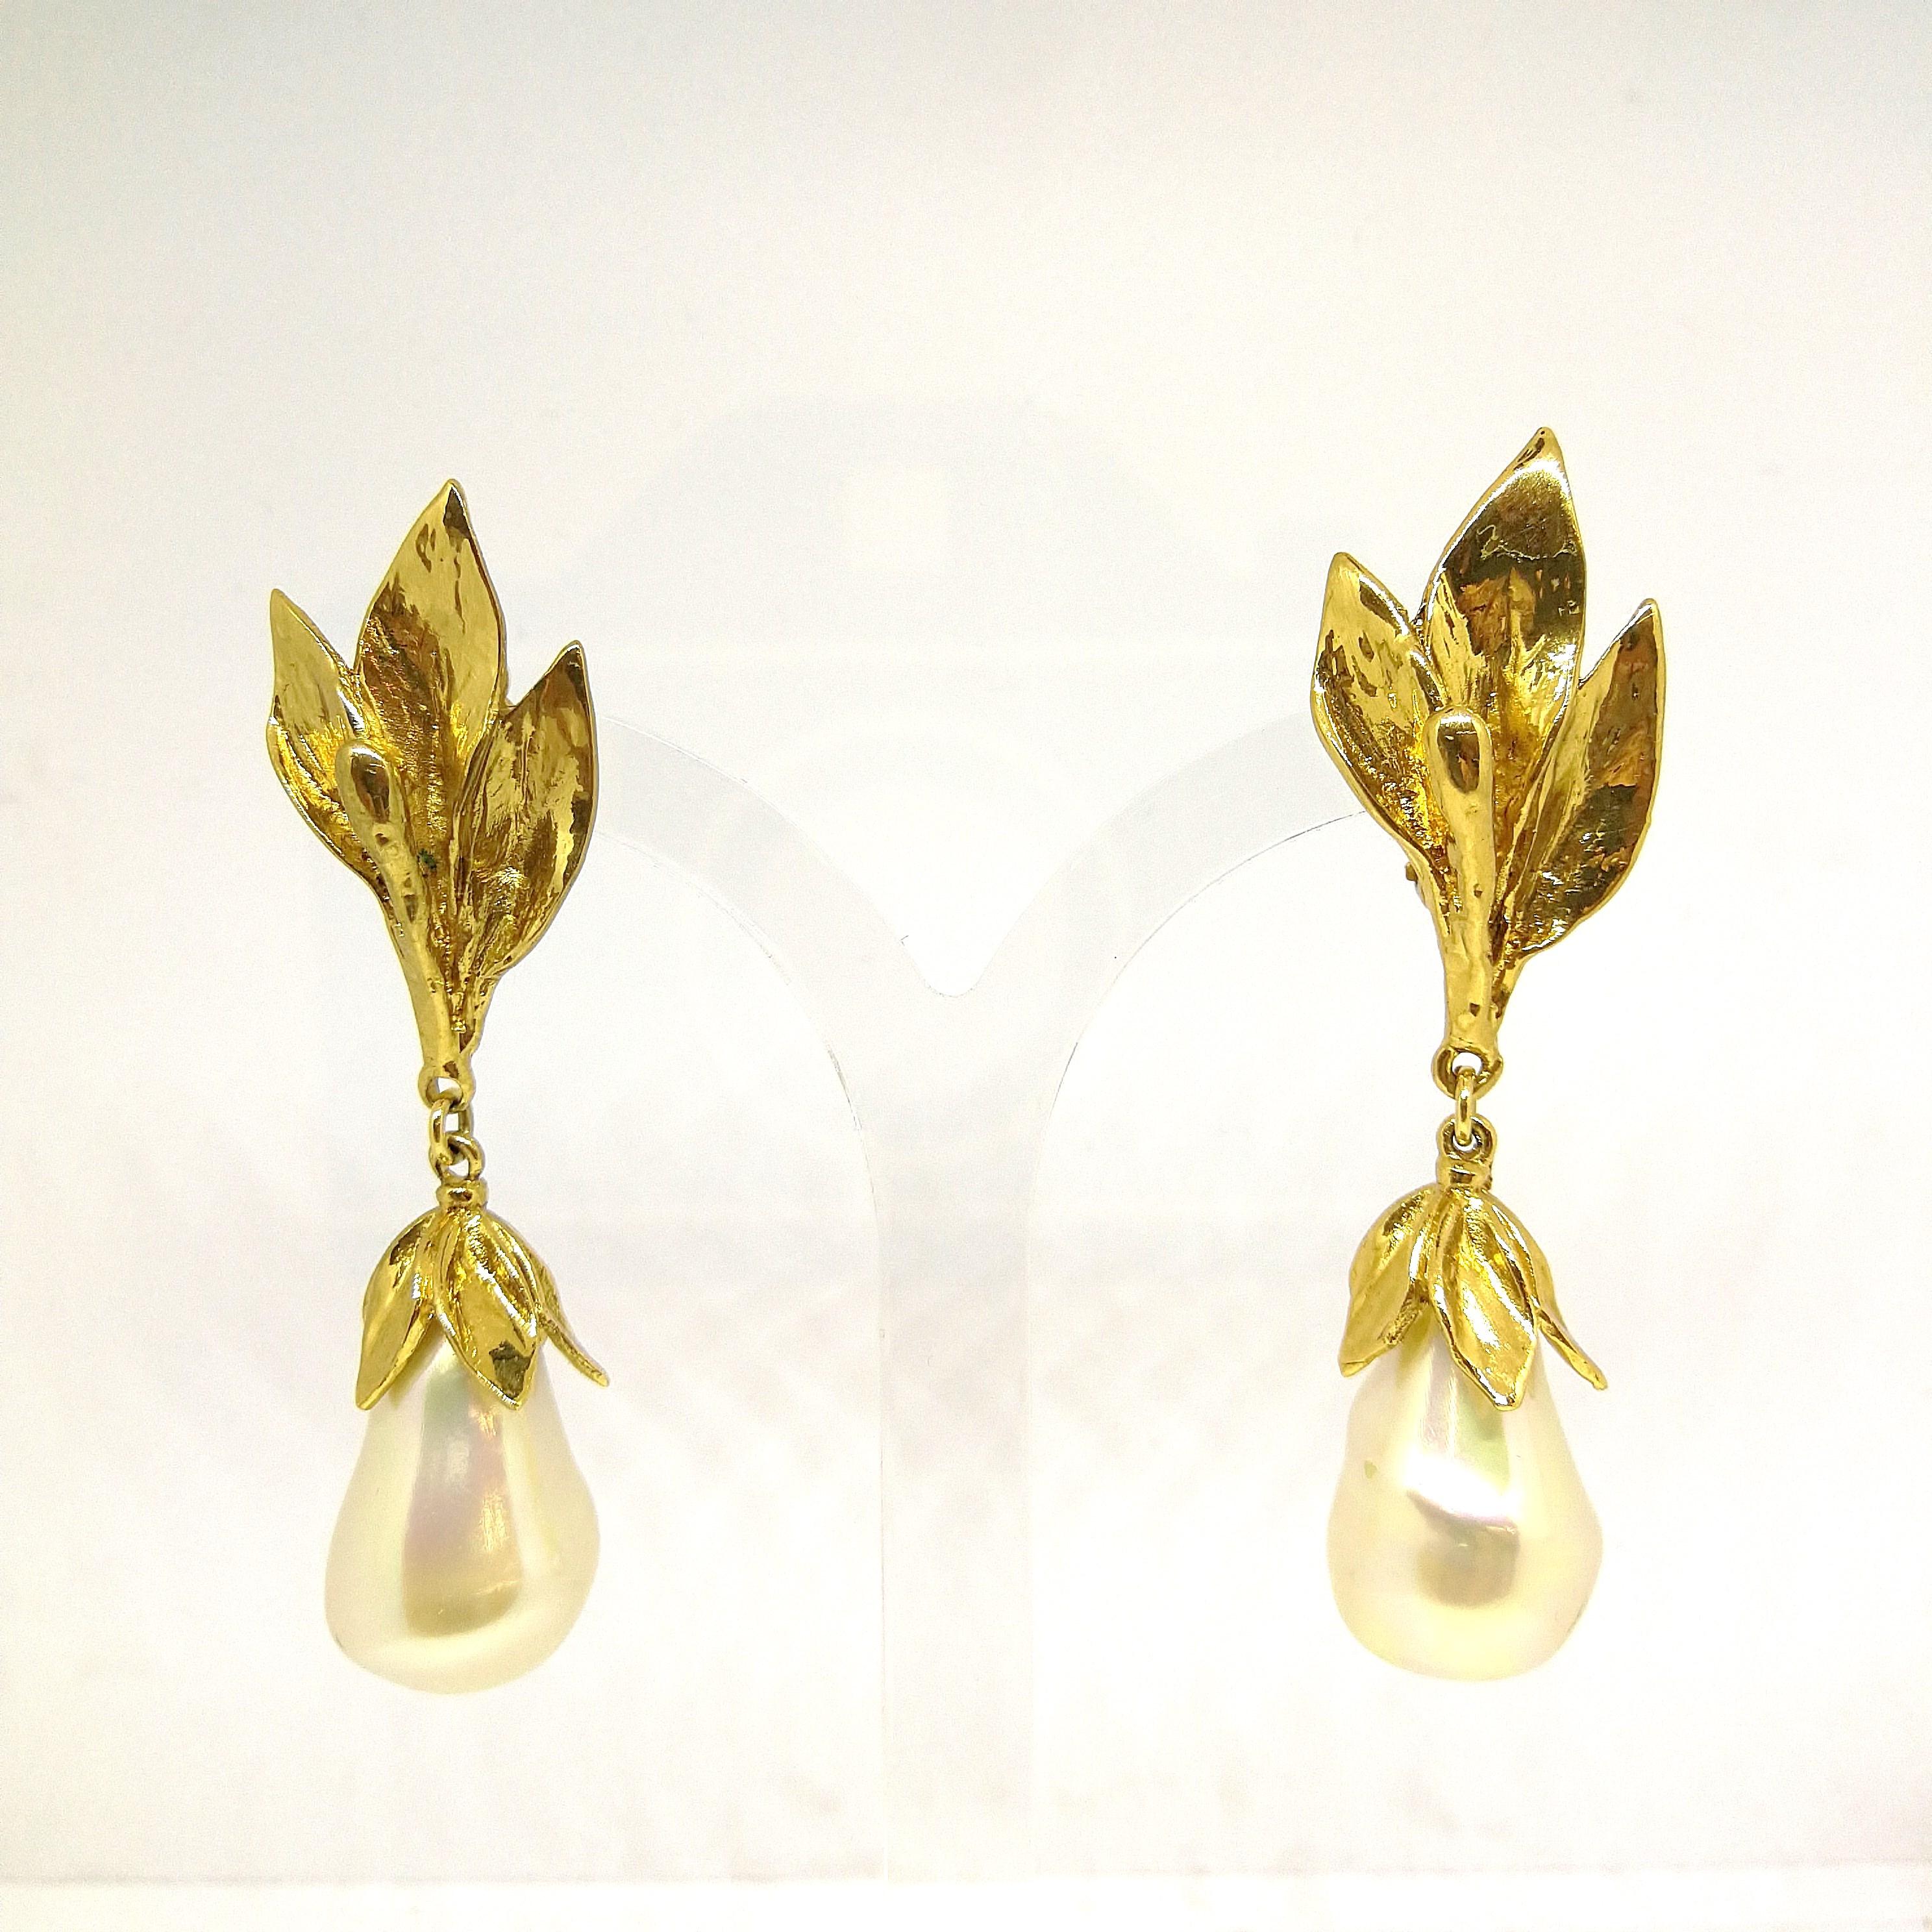 Iconic and classic drop earrings, with gilt metal leaves , in a rich gold plating, made by Maison Goossens for Yves Saint Laurent, most likely designed by Loulou De La Falaise. A wonderfully wearable pair of earrings suitable for many occassions,